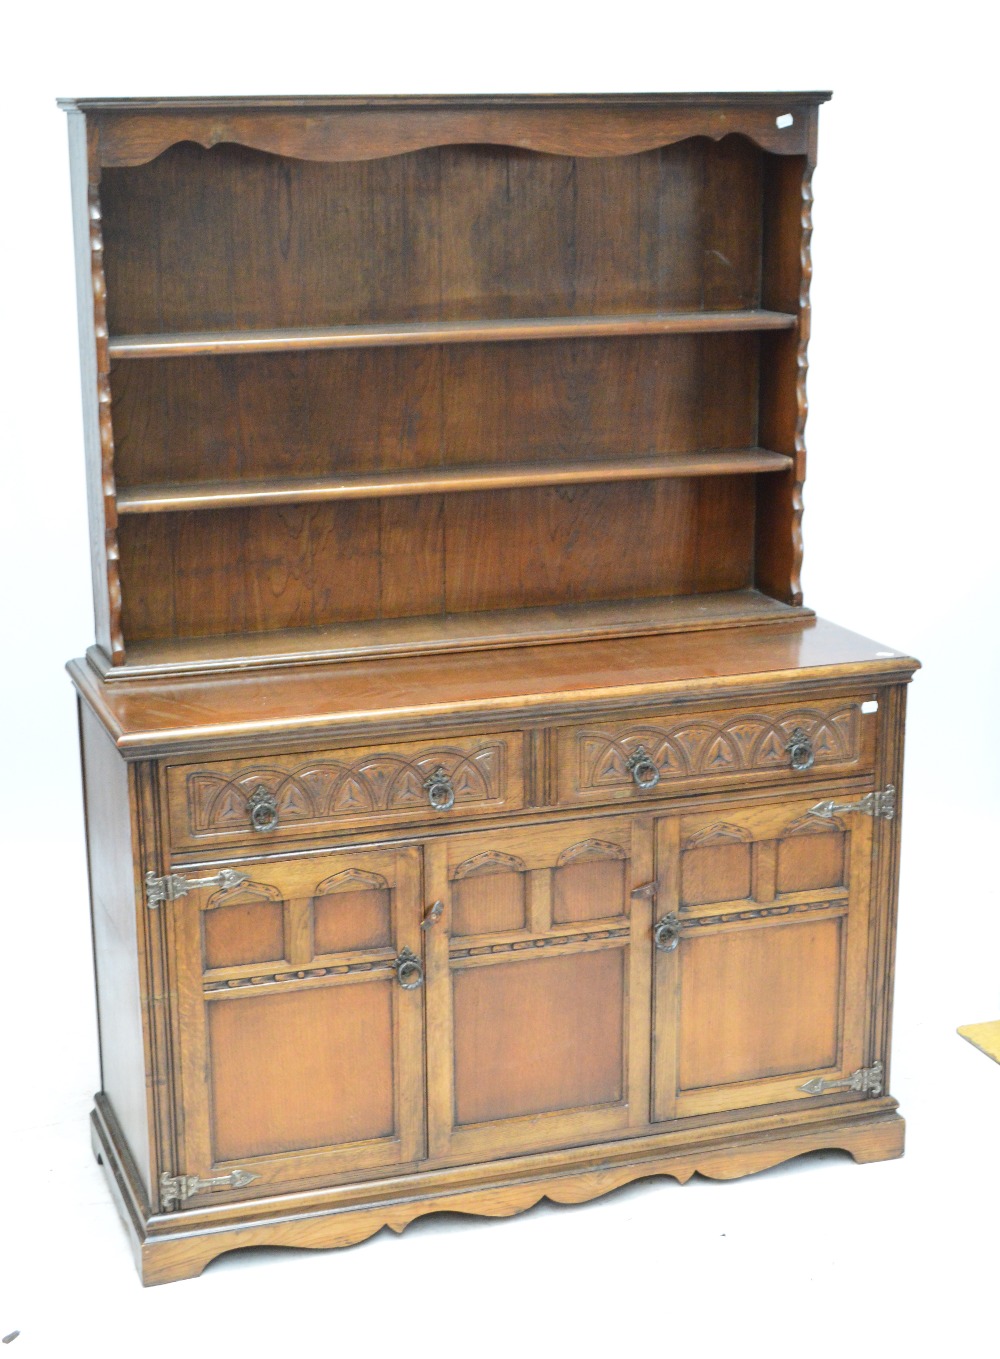 A reproduction oak dresser with boarded plate rack and carved detail. - Image 2 of 2